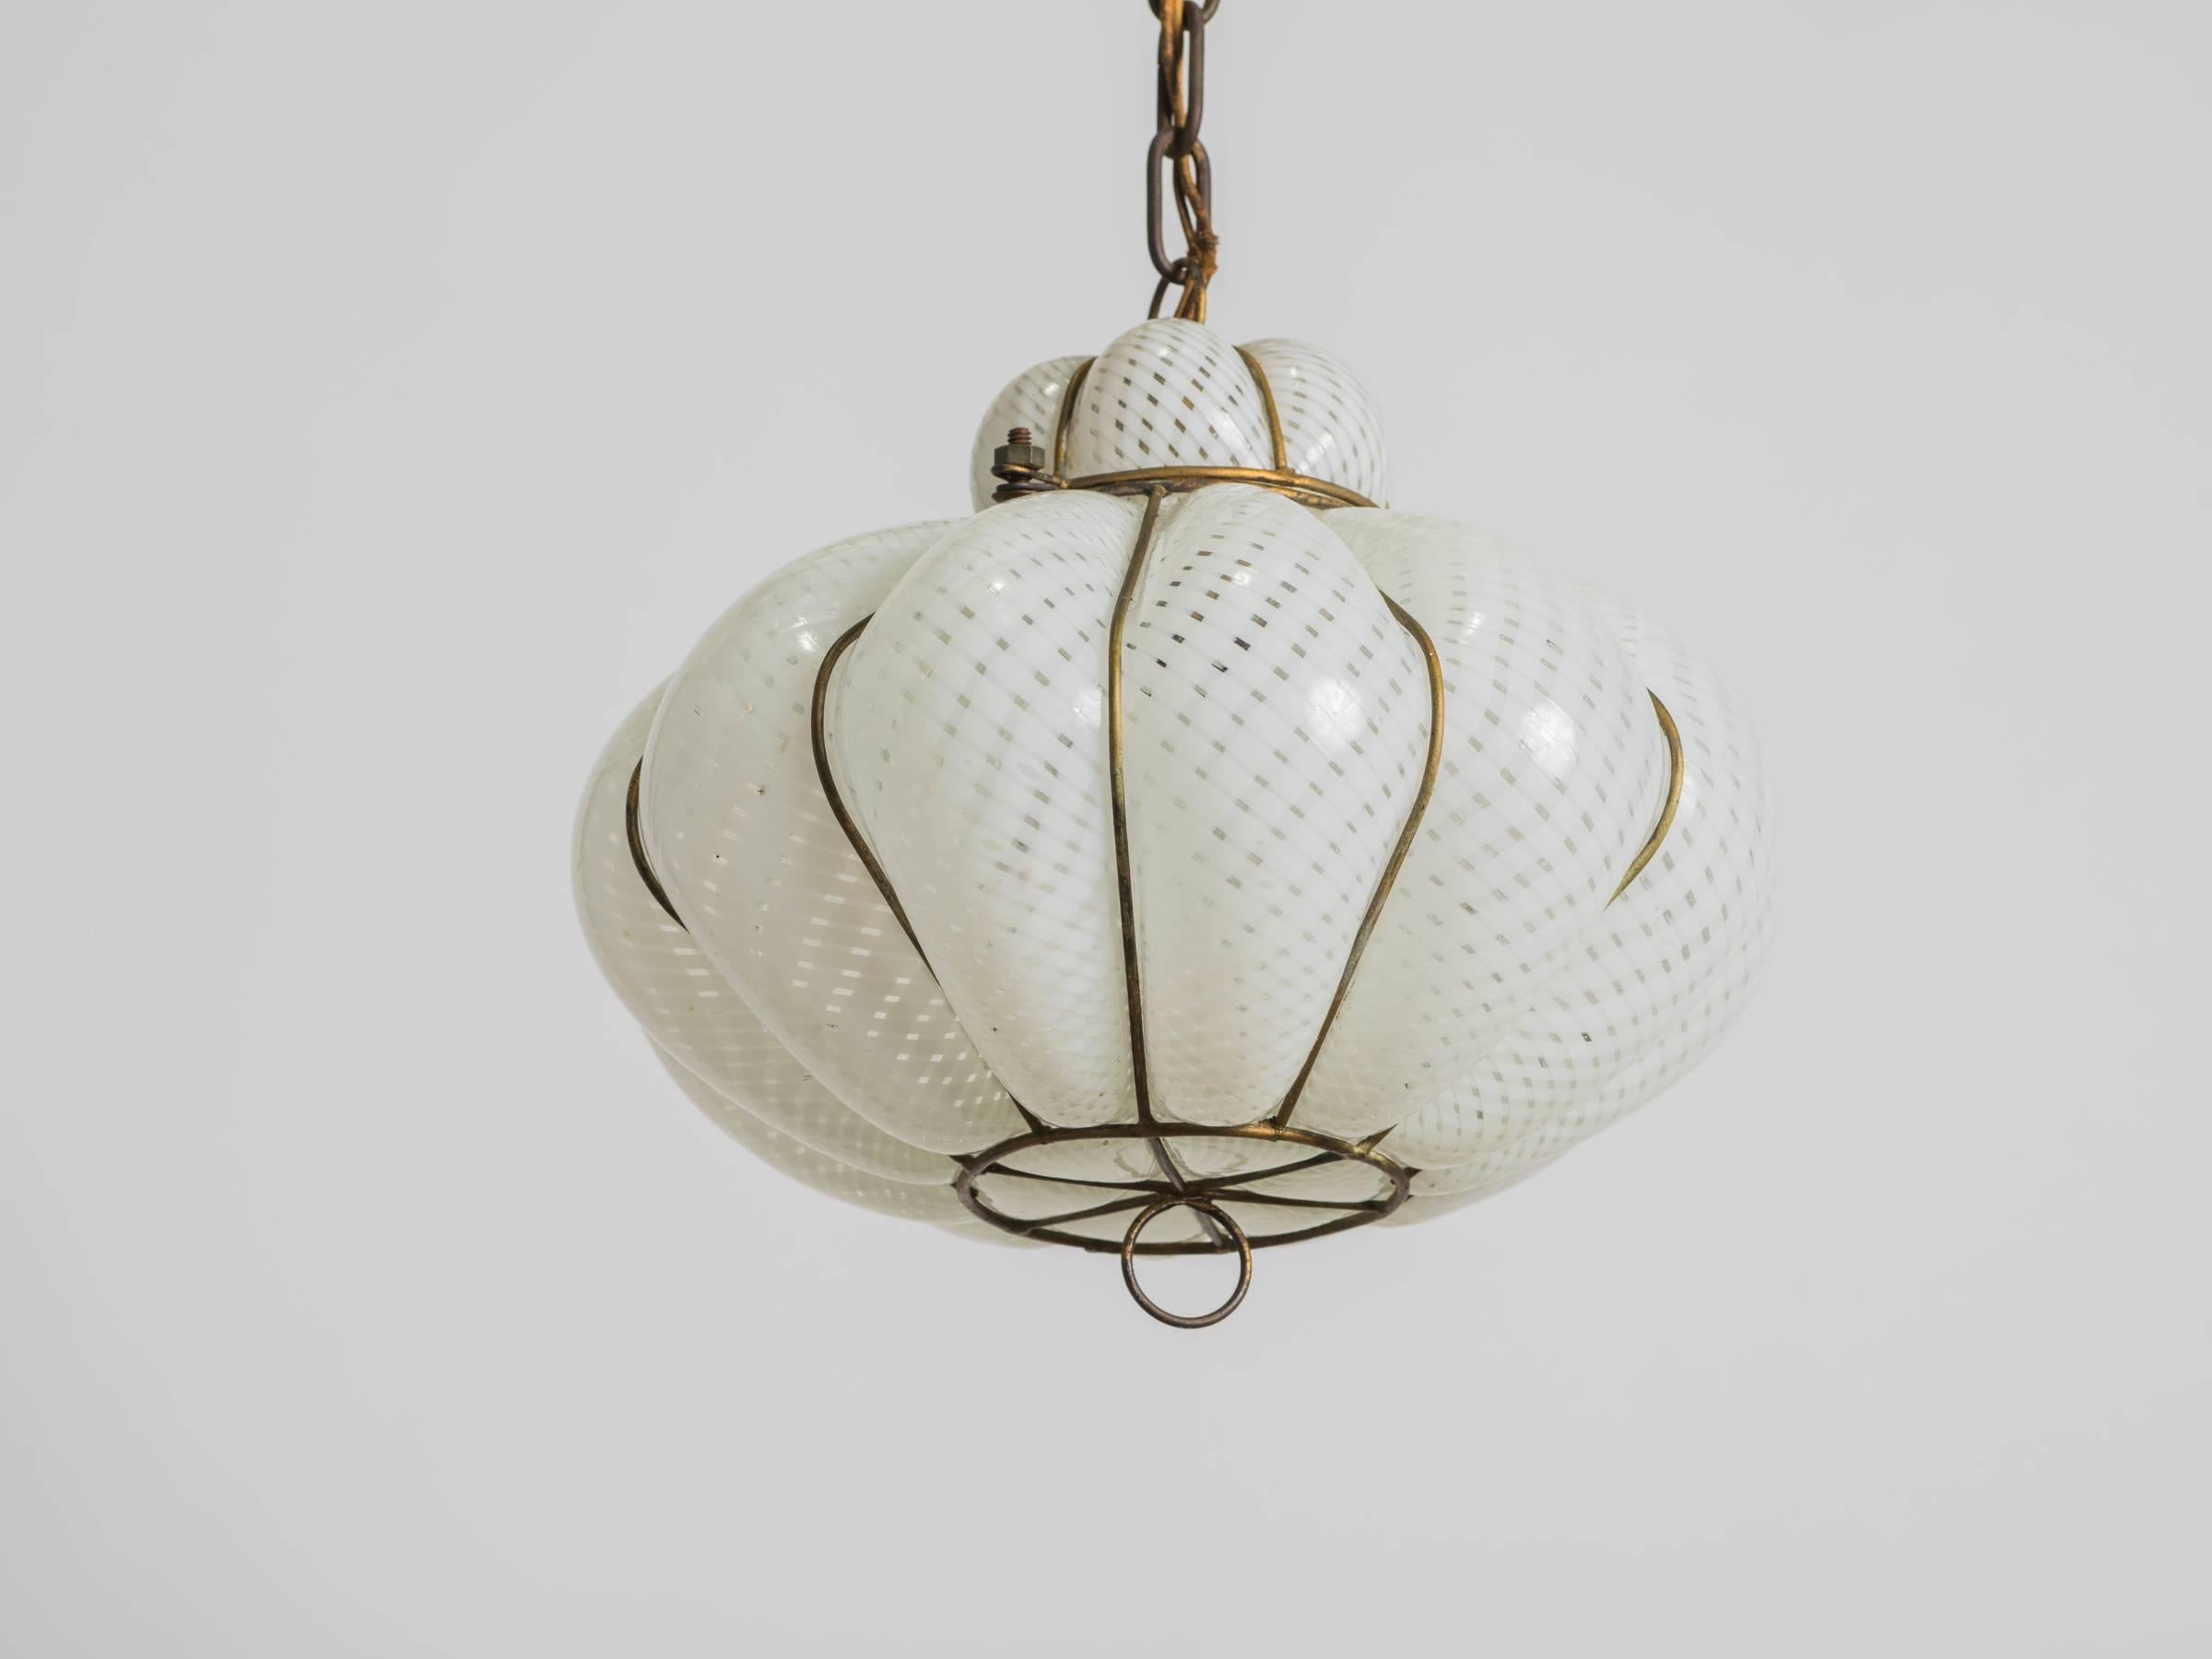 Handblown into a wire cage, this Italian fixture is from the 1950s.